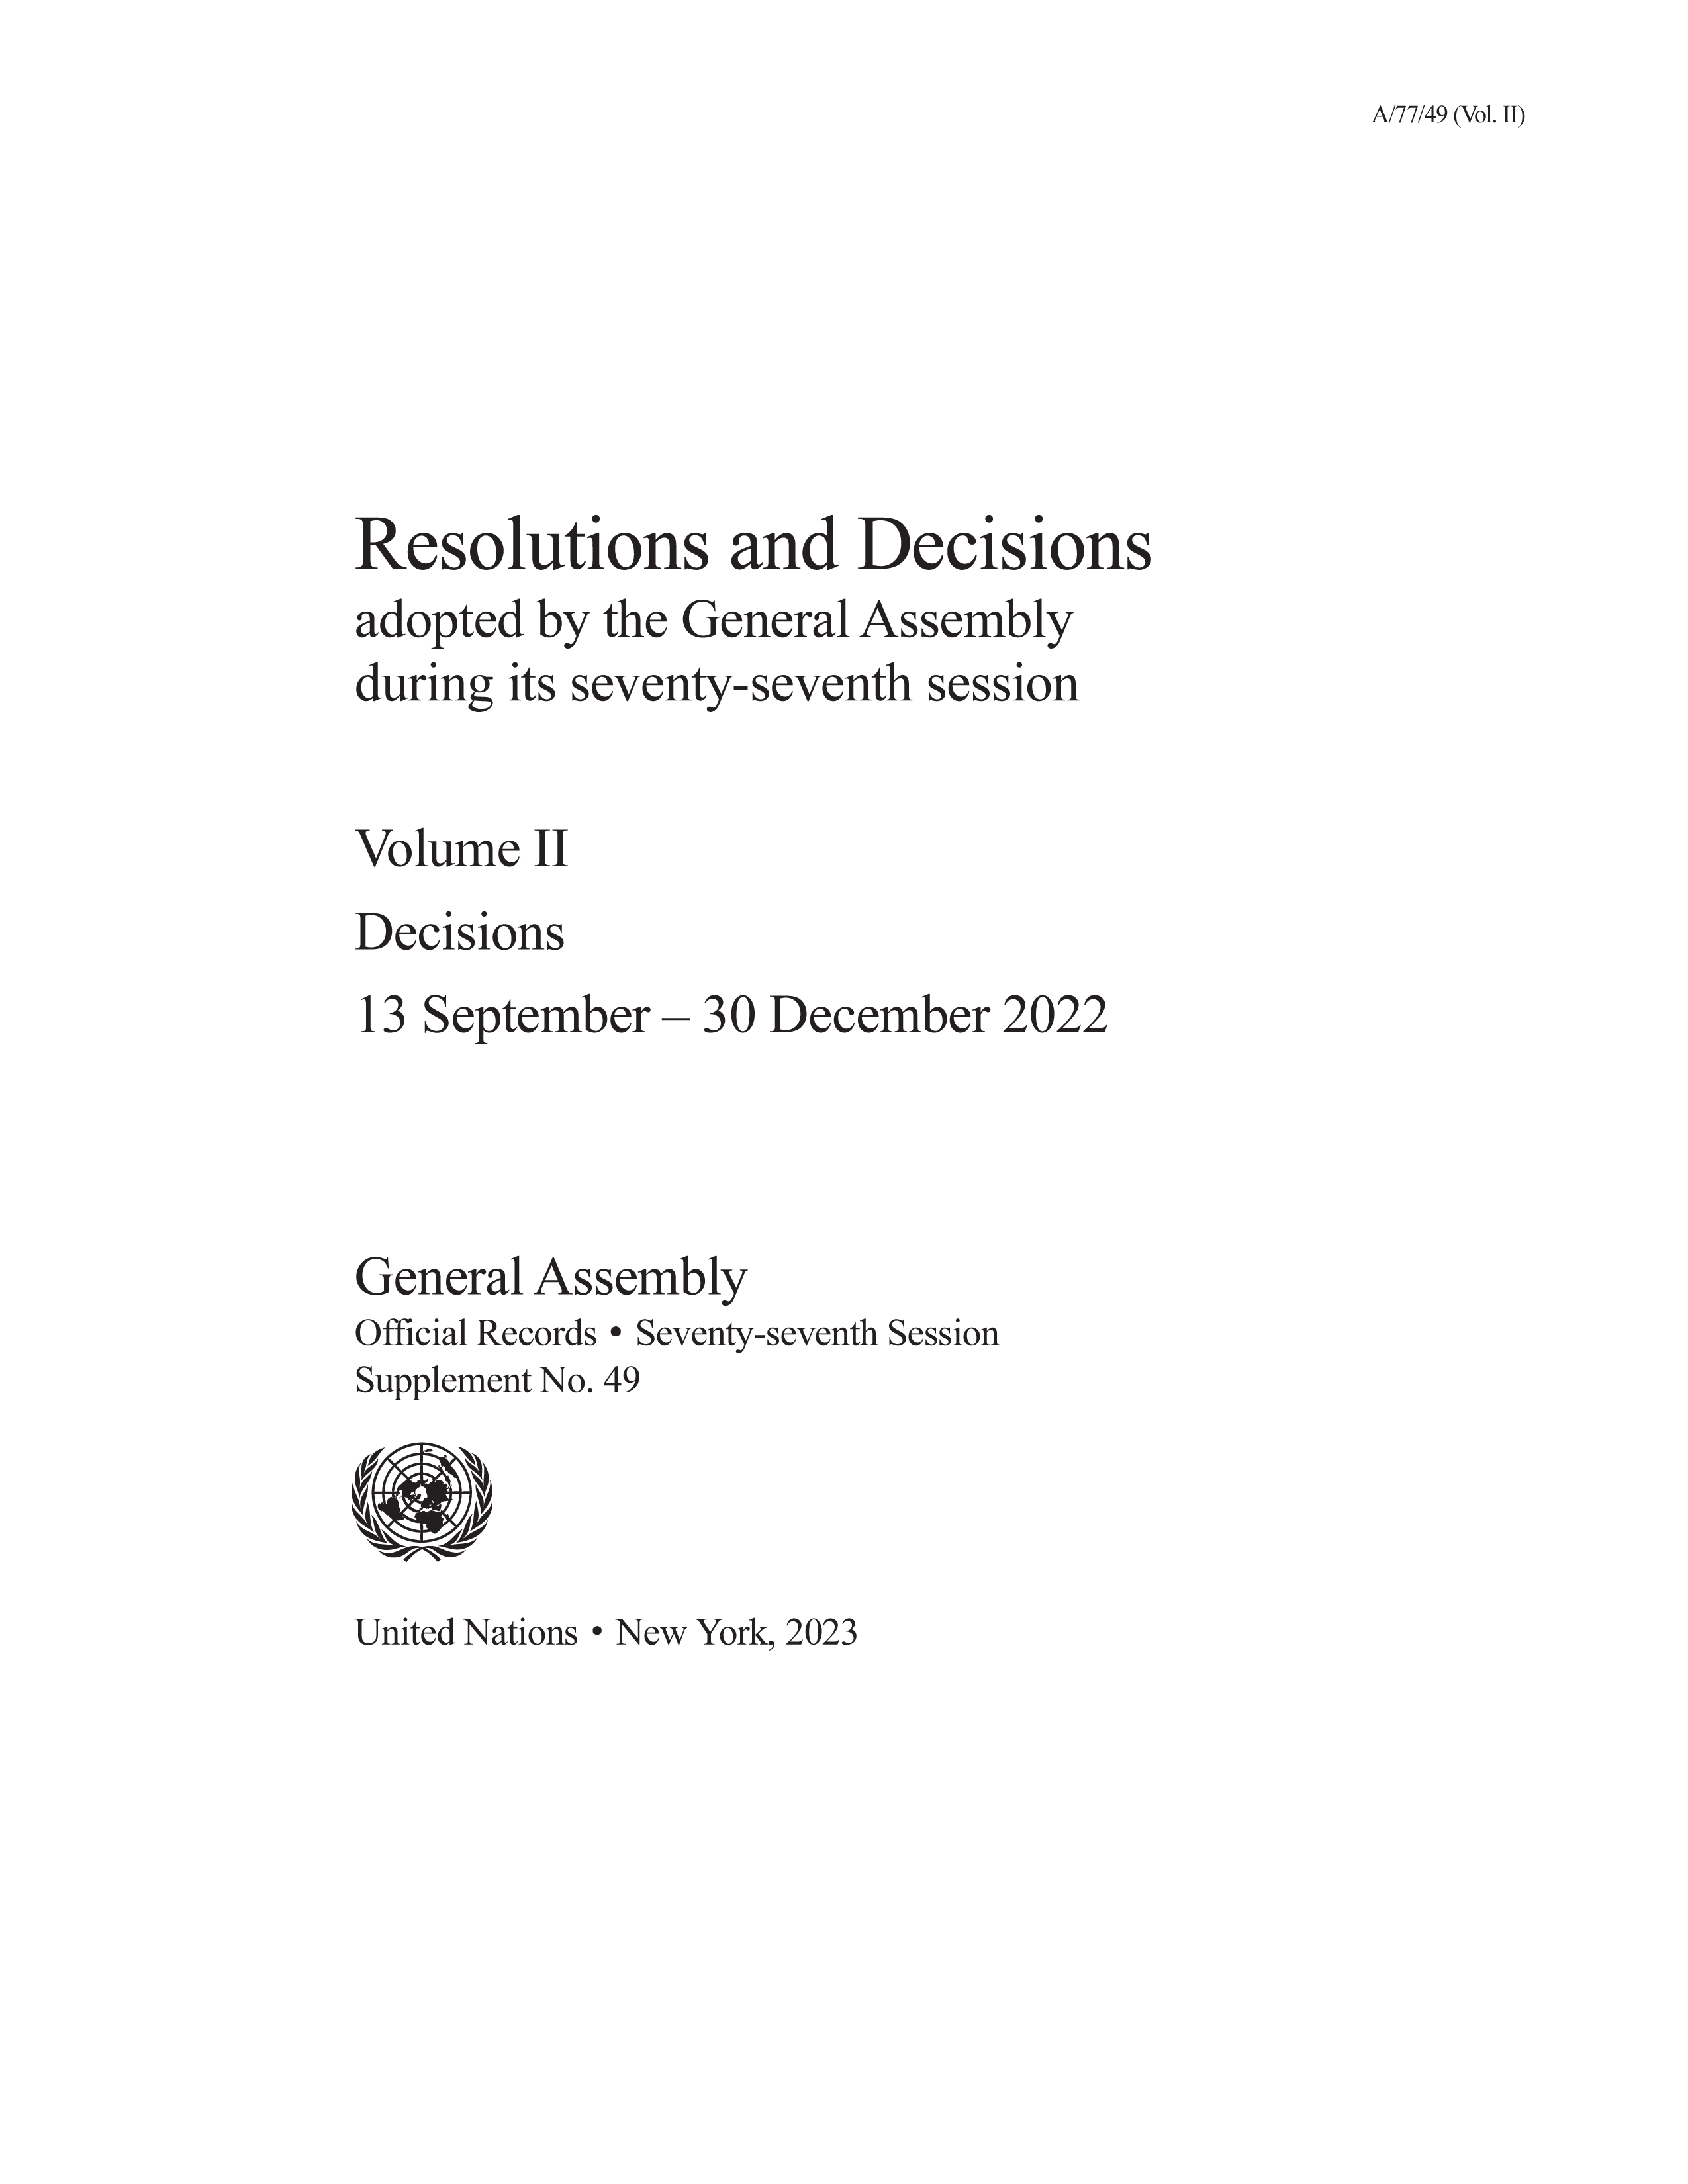 image of Resolutions and Decisions Adopted by the General Assembly During its Seventy-seventh Session: Volume II